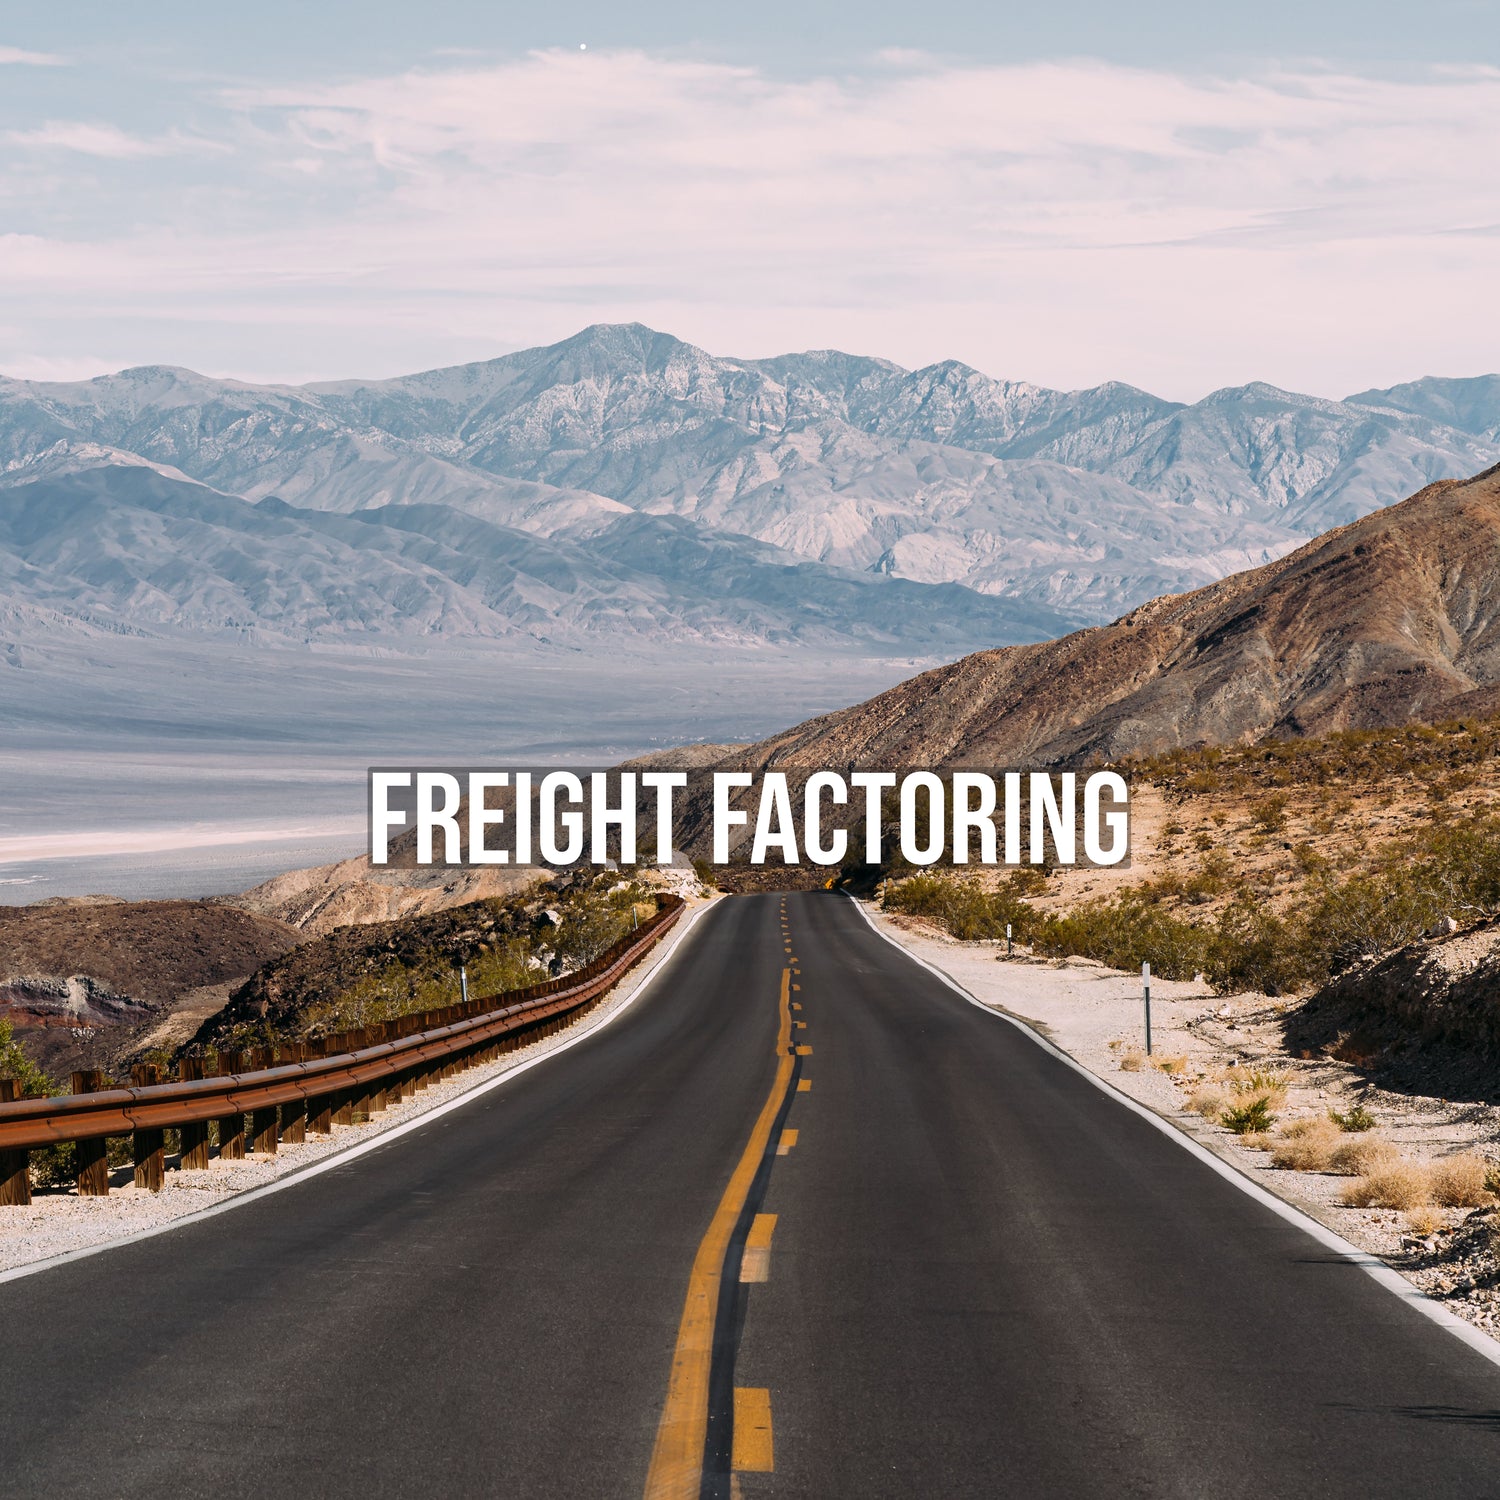 Long road in the mountains with the text "Freight Factoring" Bolded in the center. 